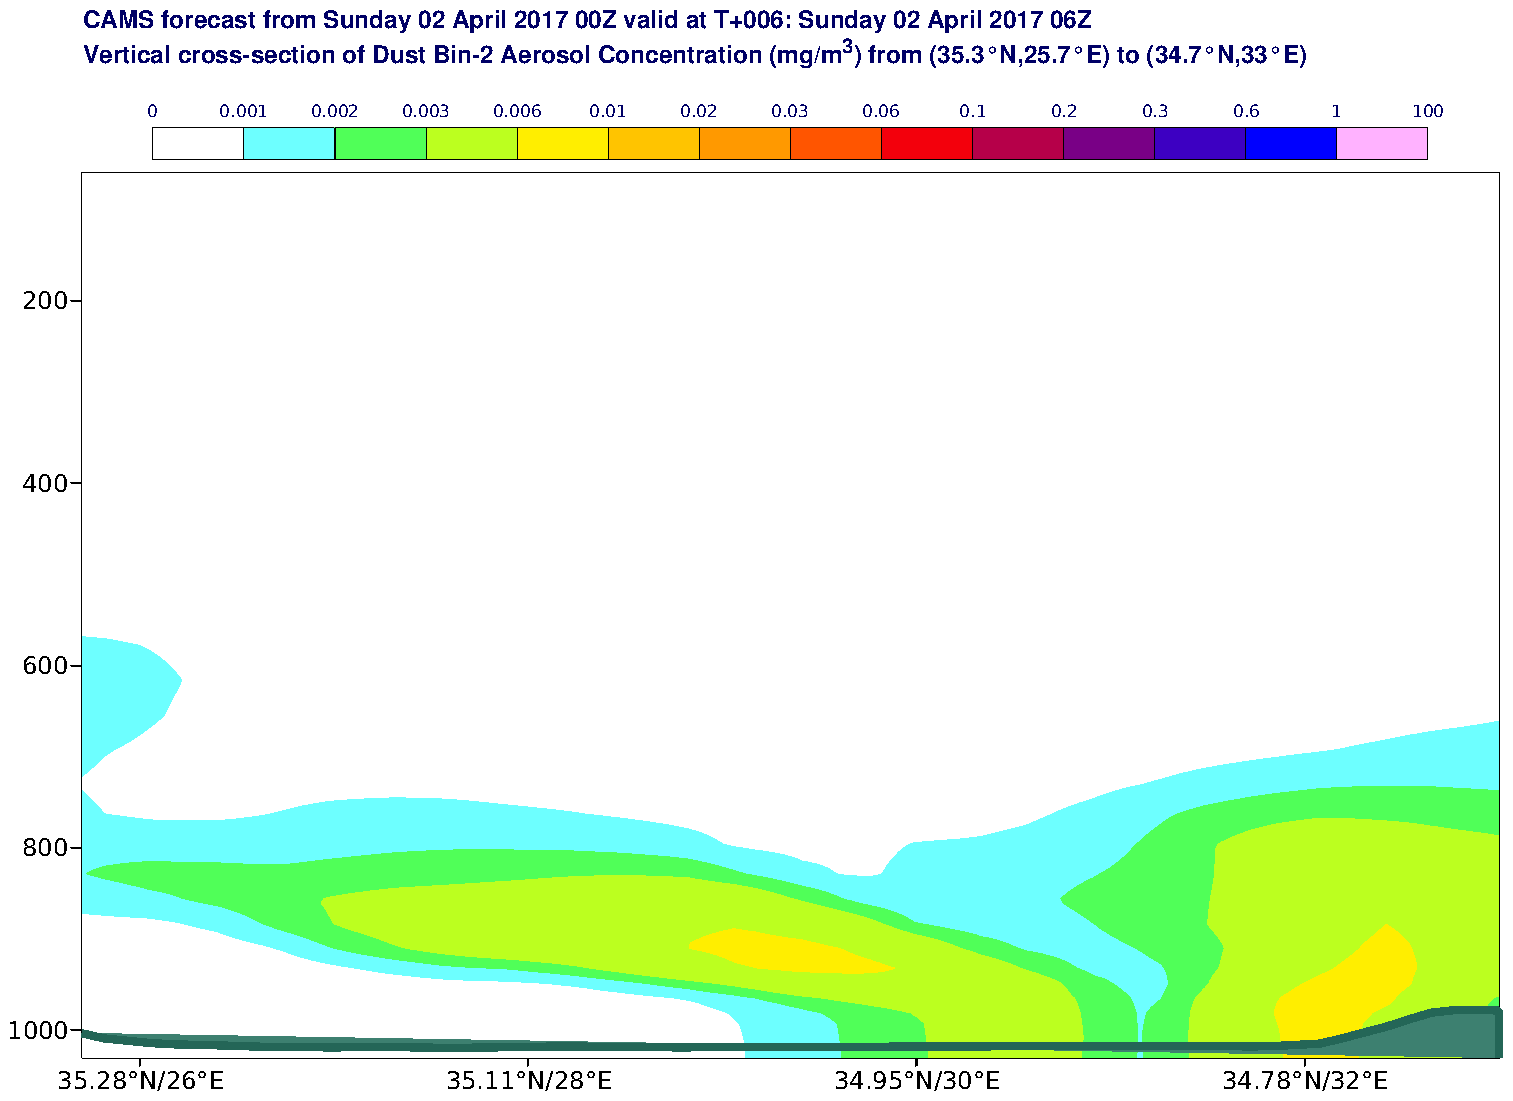 Vertical cross-section of Dust Bin-2 Aerosol Concentration (mg/m3) valid at T6 - 2017-04-02 06:00